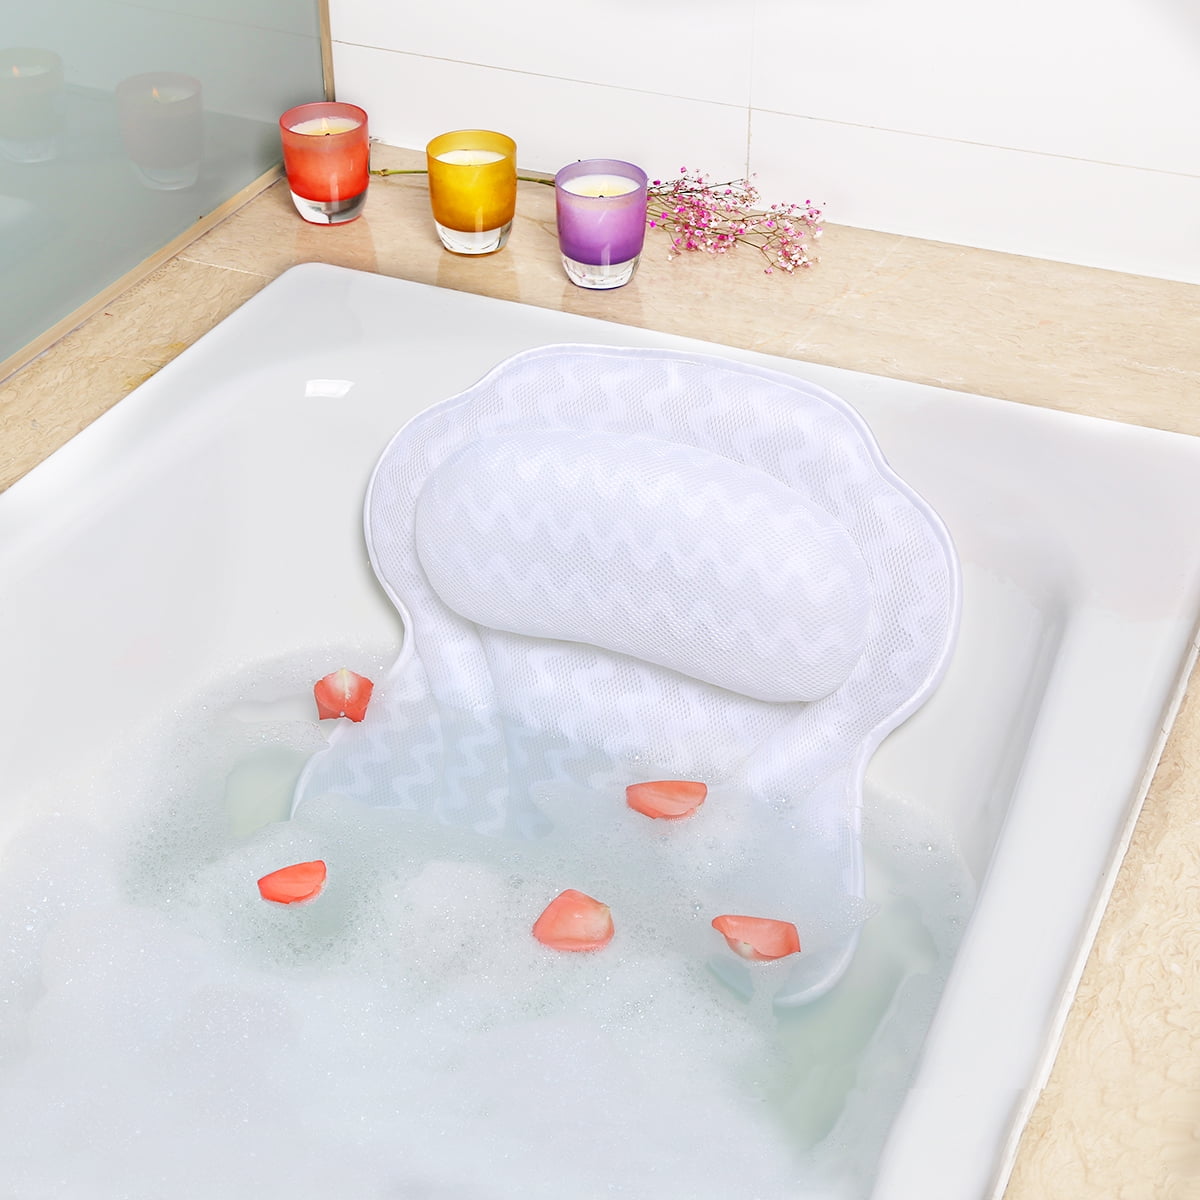 Details about   Soft Breathable 3D Bath Pillow Spa Pillows for Home Hot Tub Bathroom Accessories 